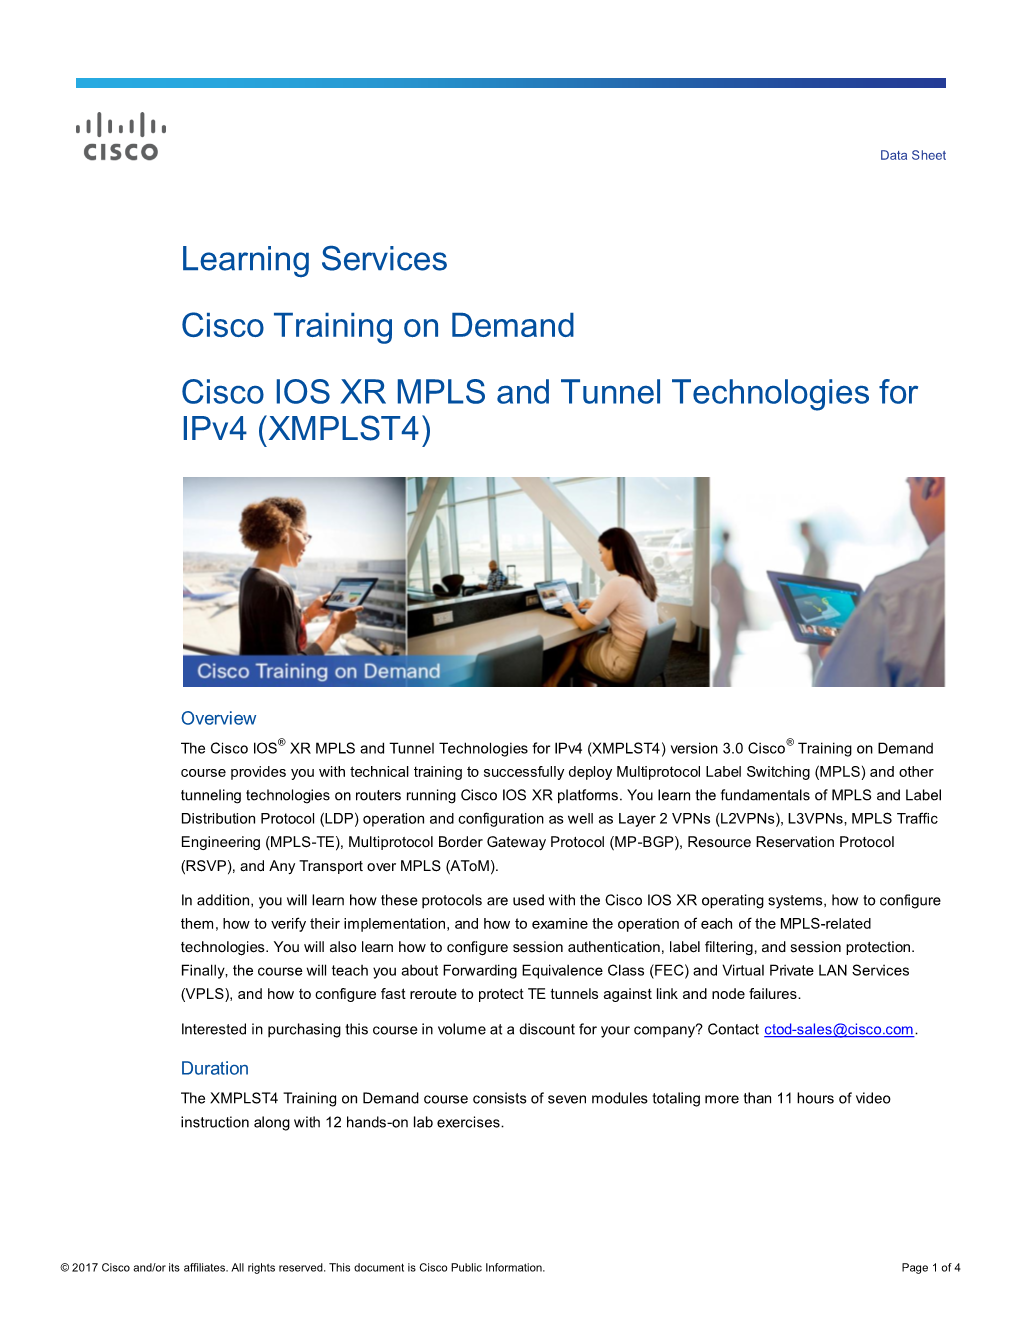 Cisco IOS XR MPLS and Tunnel Technologies for Ipv4 (XMPLST4)